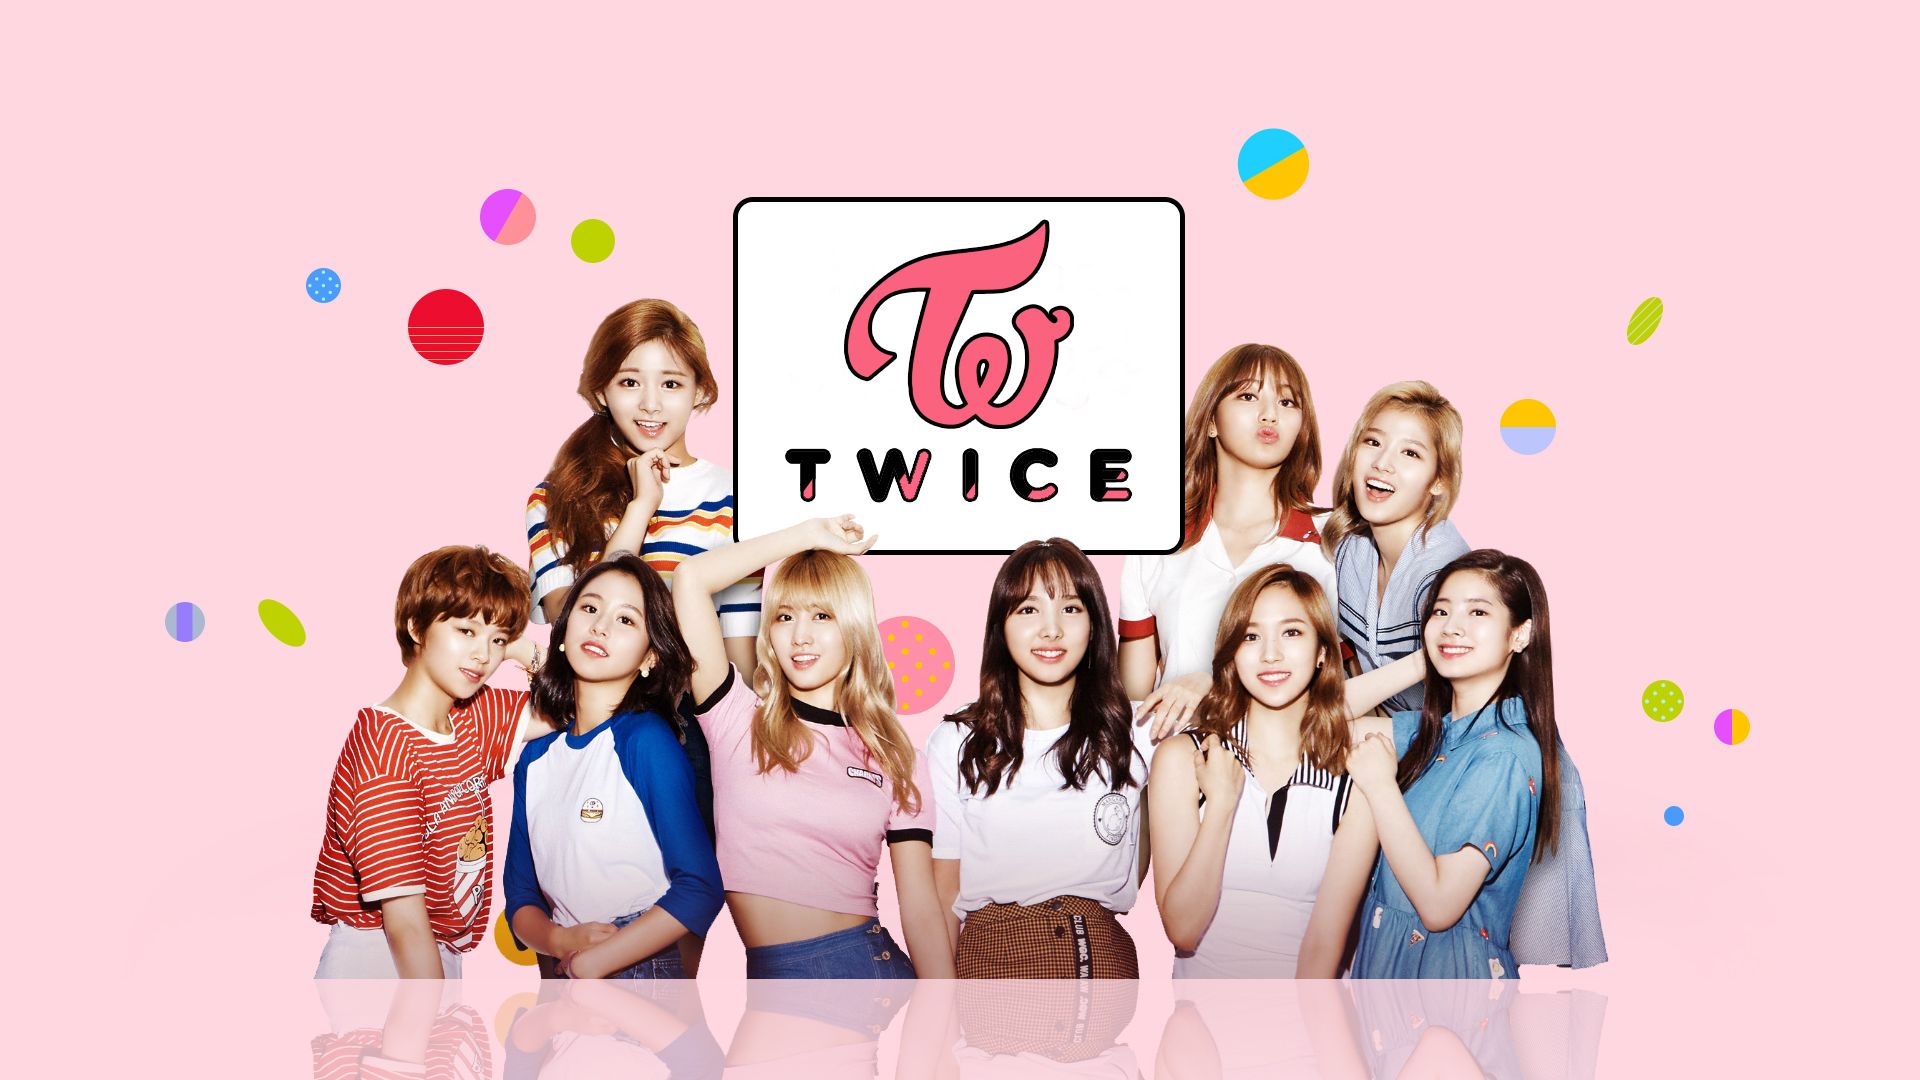 Twice Group Wallpaper for All Fans